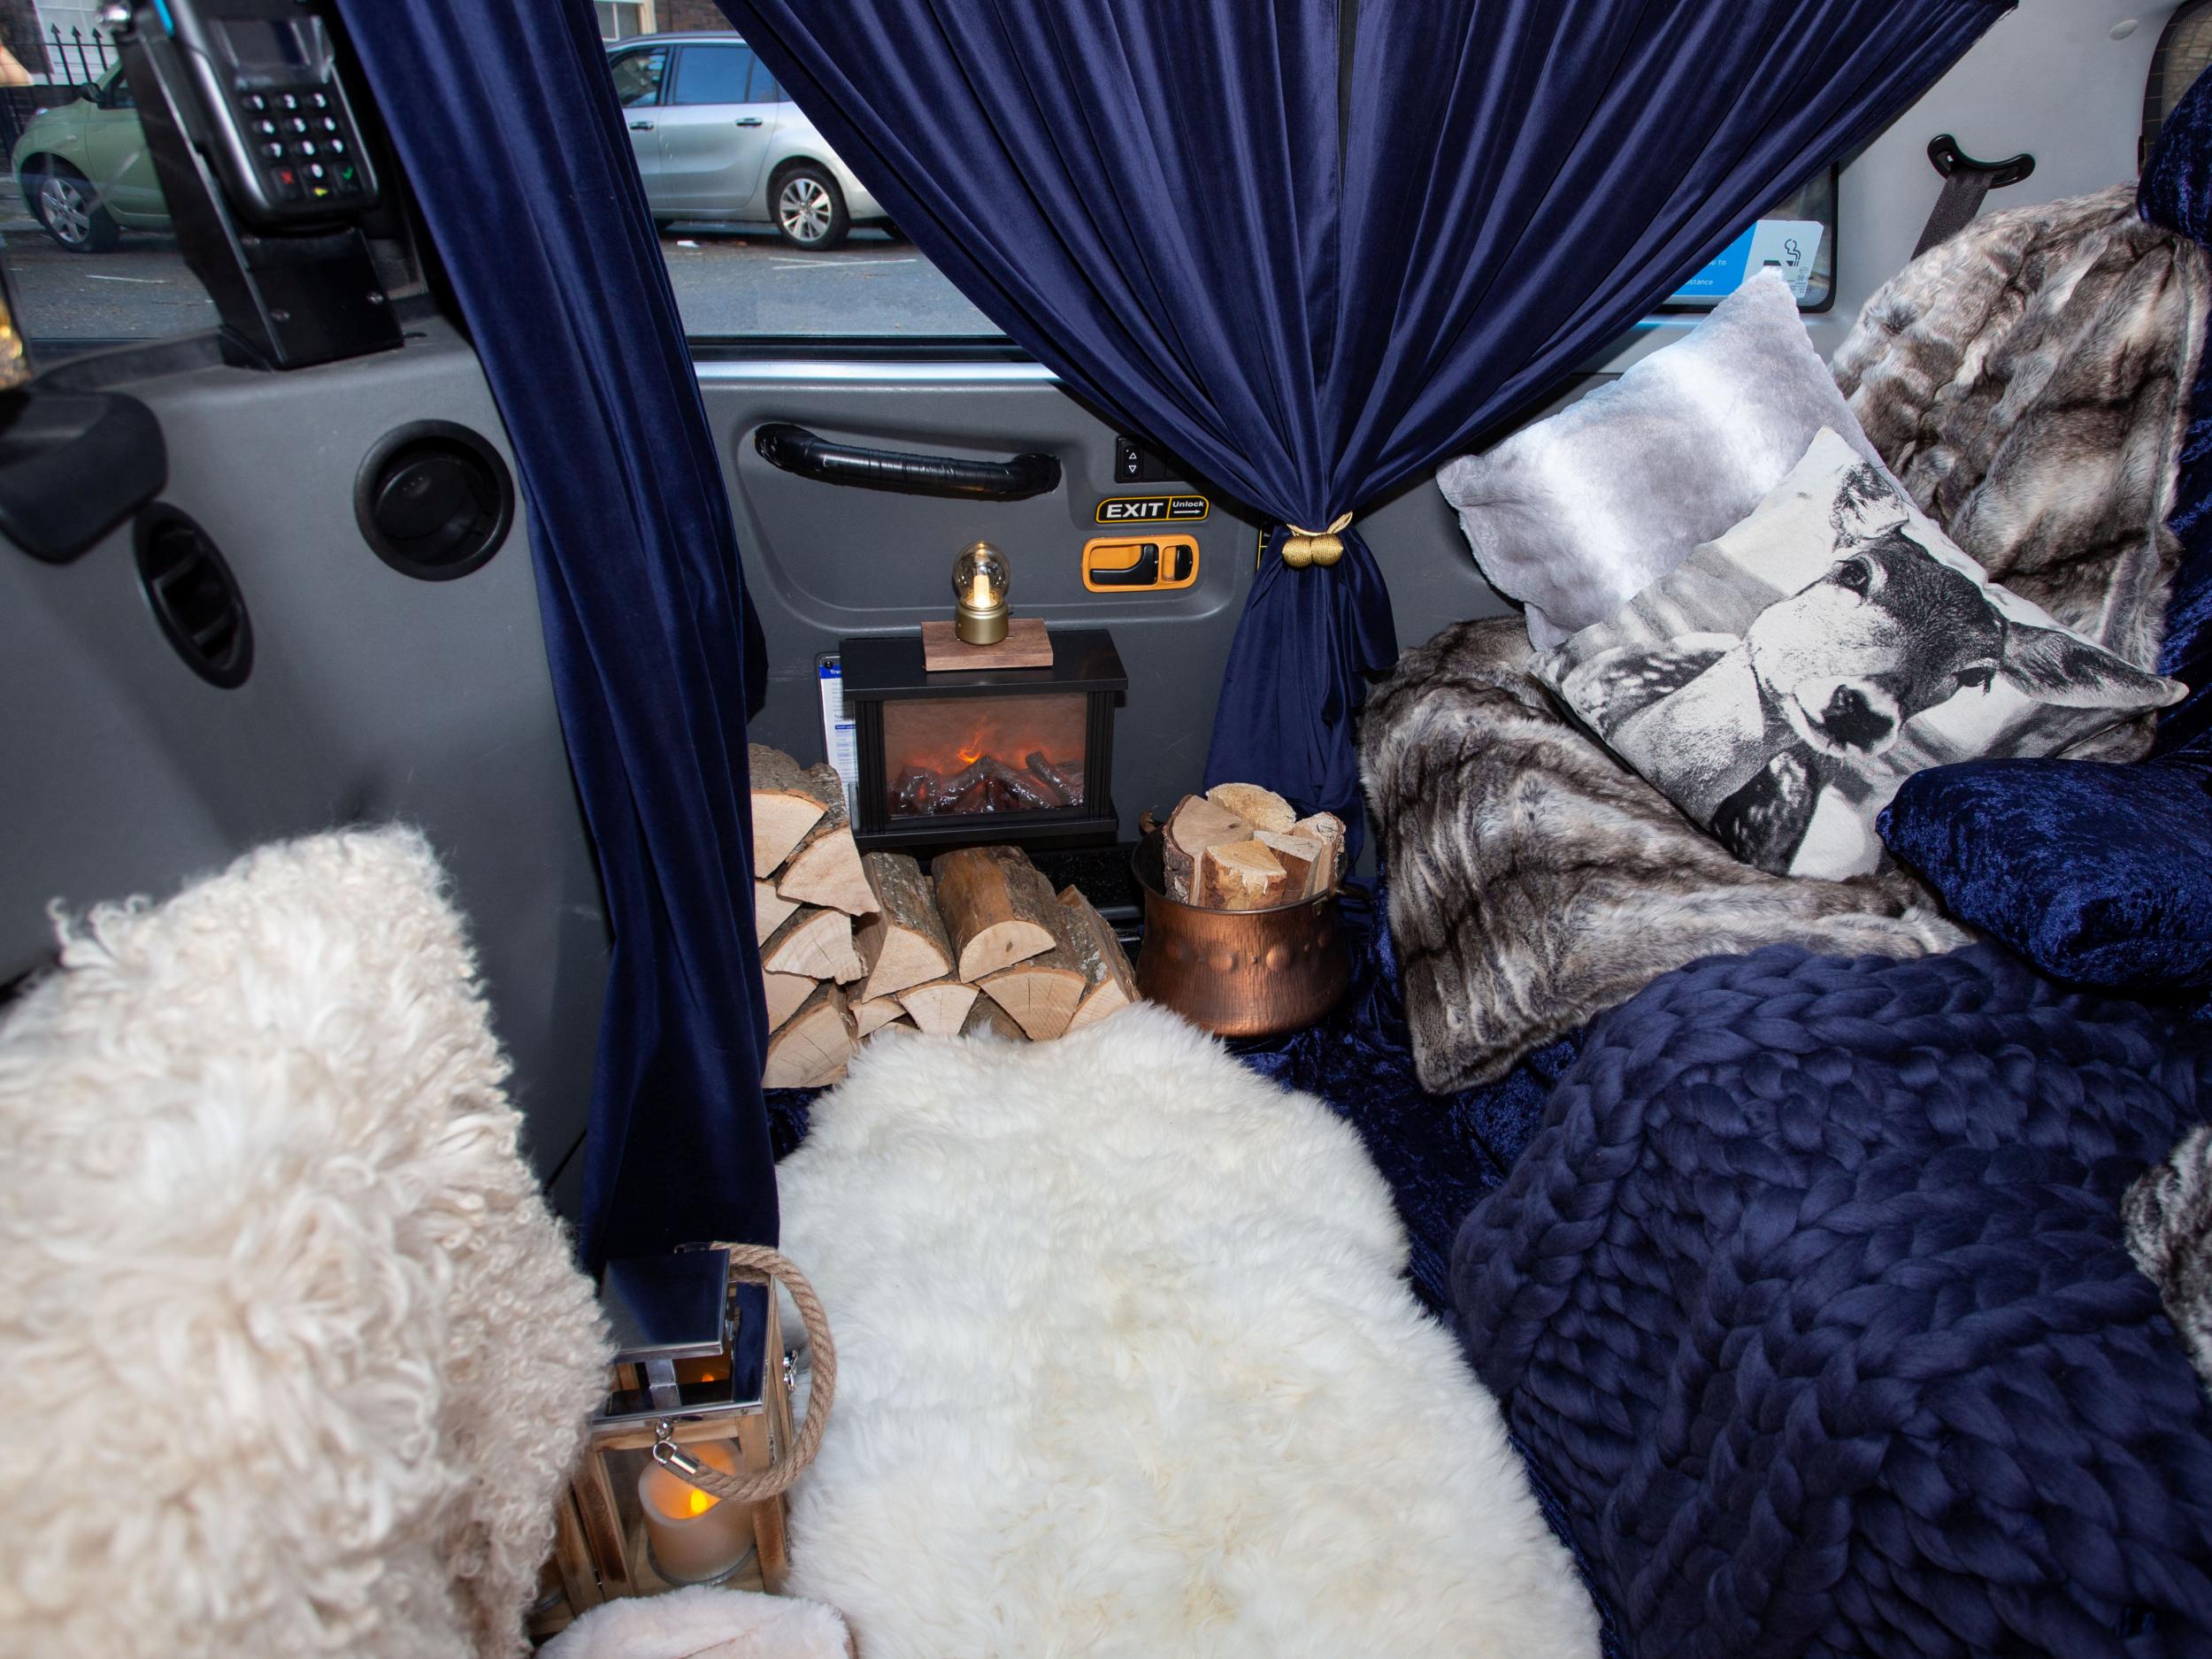 The wood-cabin inspired Baxi Taxi is decked out with curtains and faux fur rugs